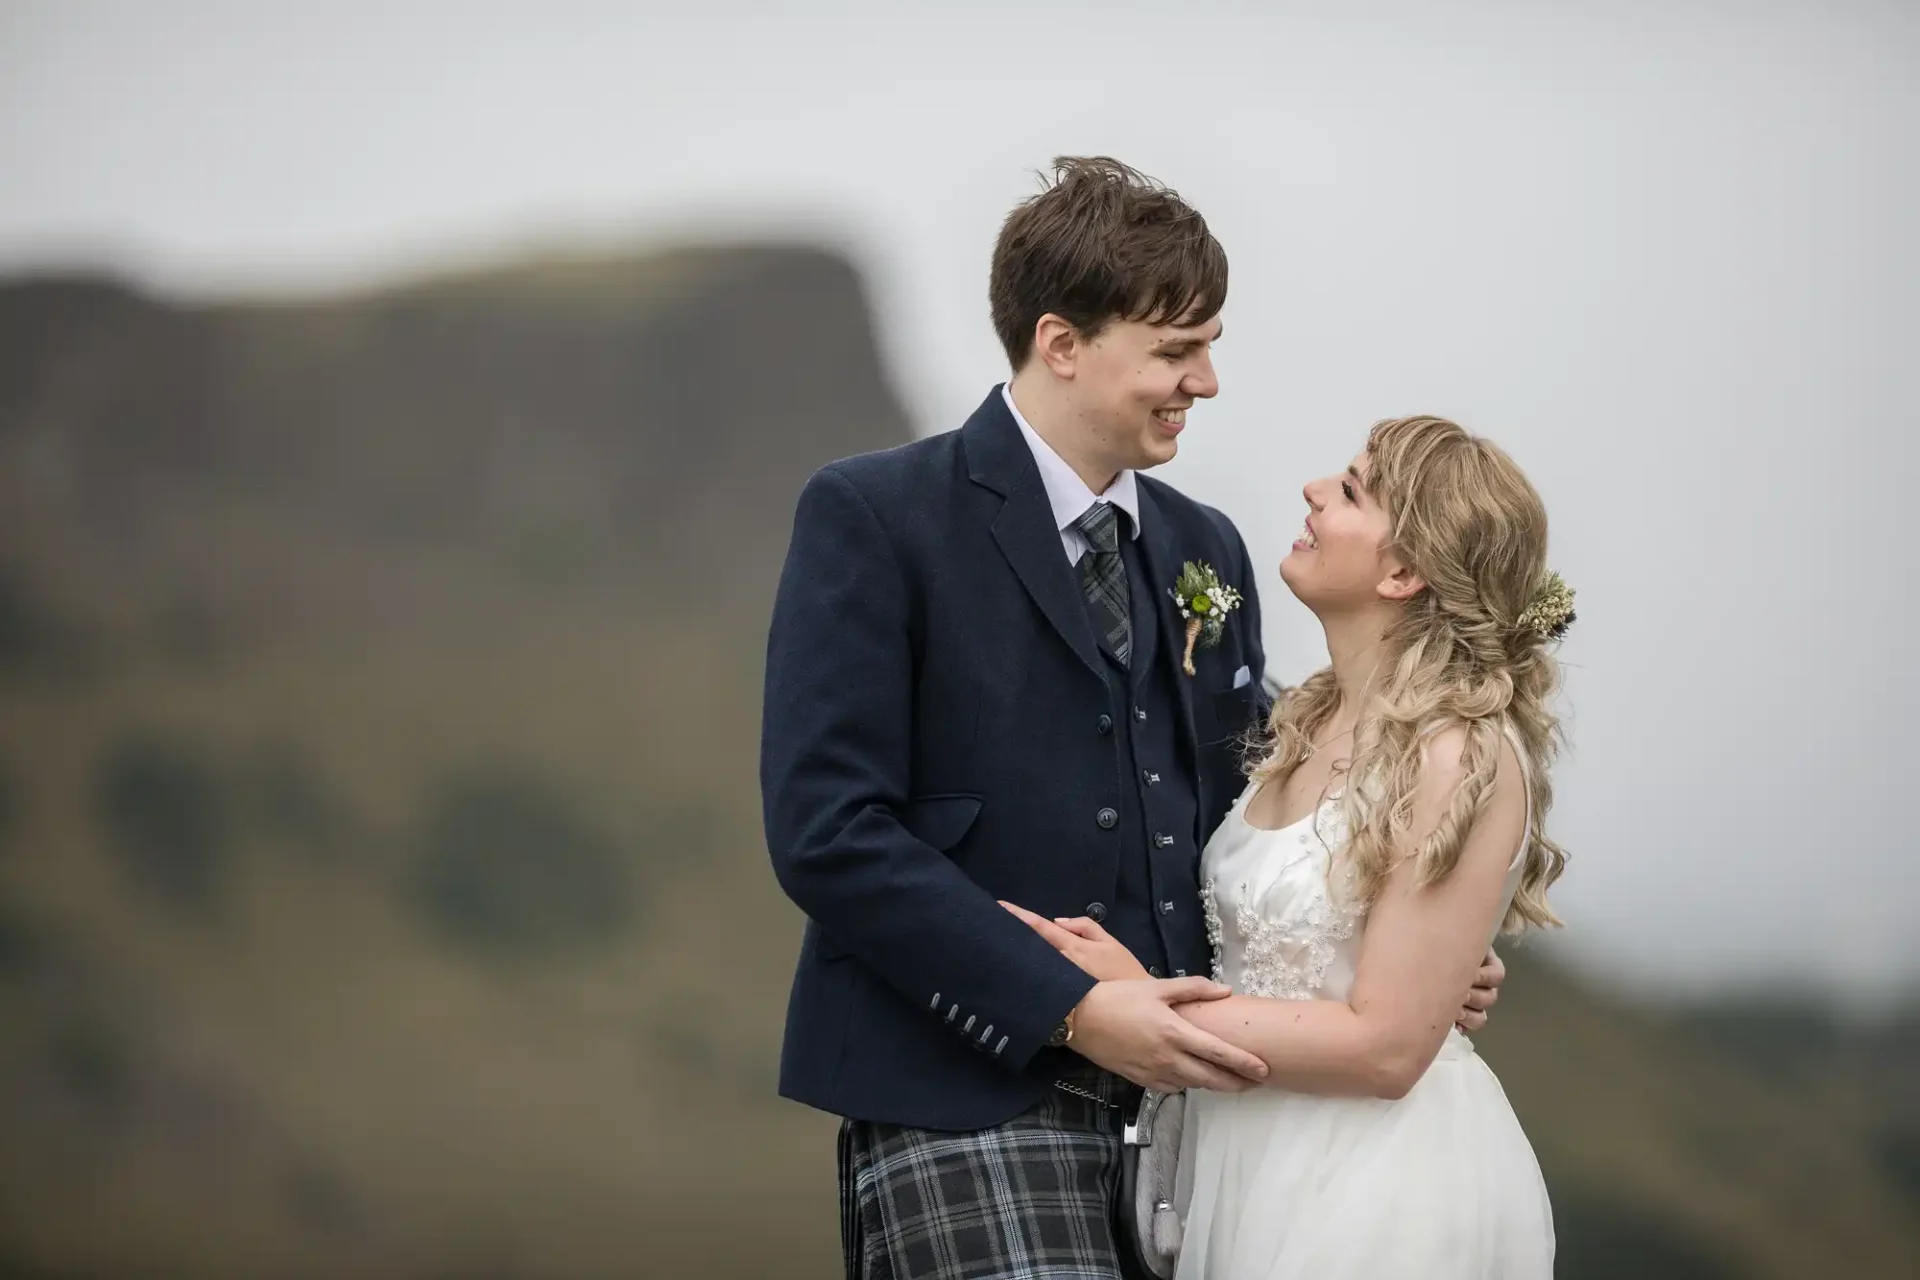 A bride and groom in wedding attire smiling at each other, standing outdoors with a blurred hill in the background.